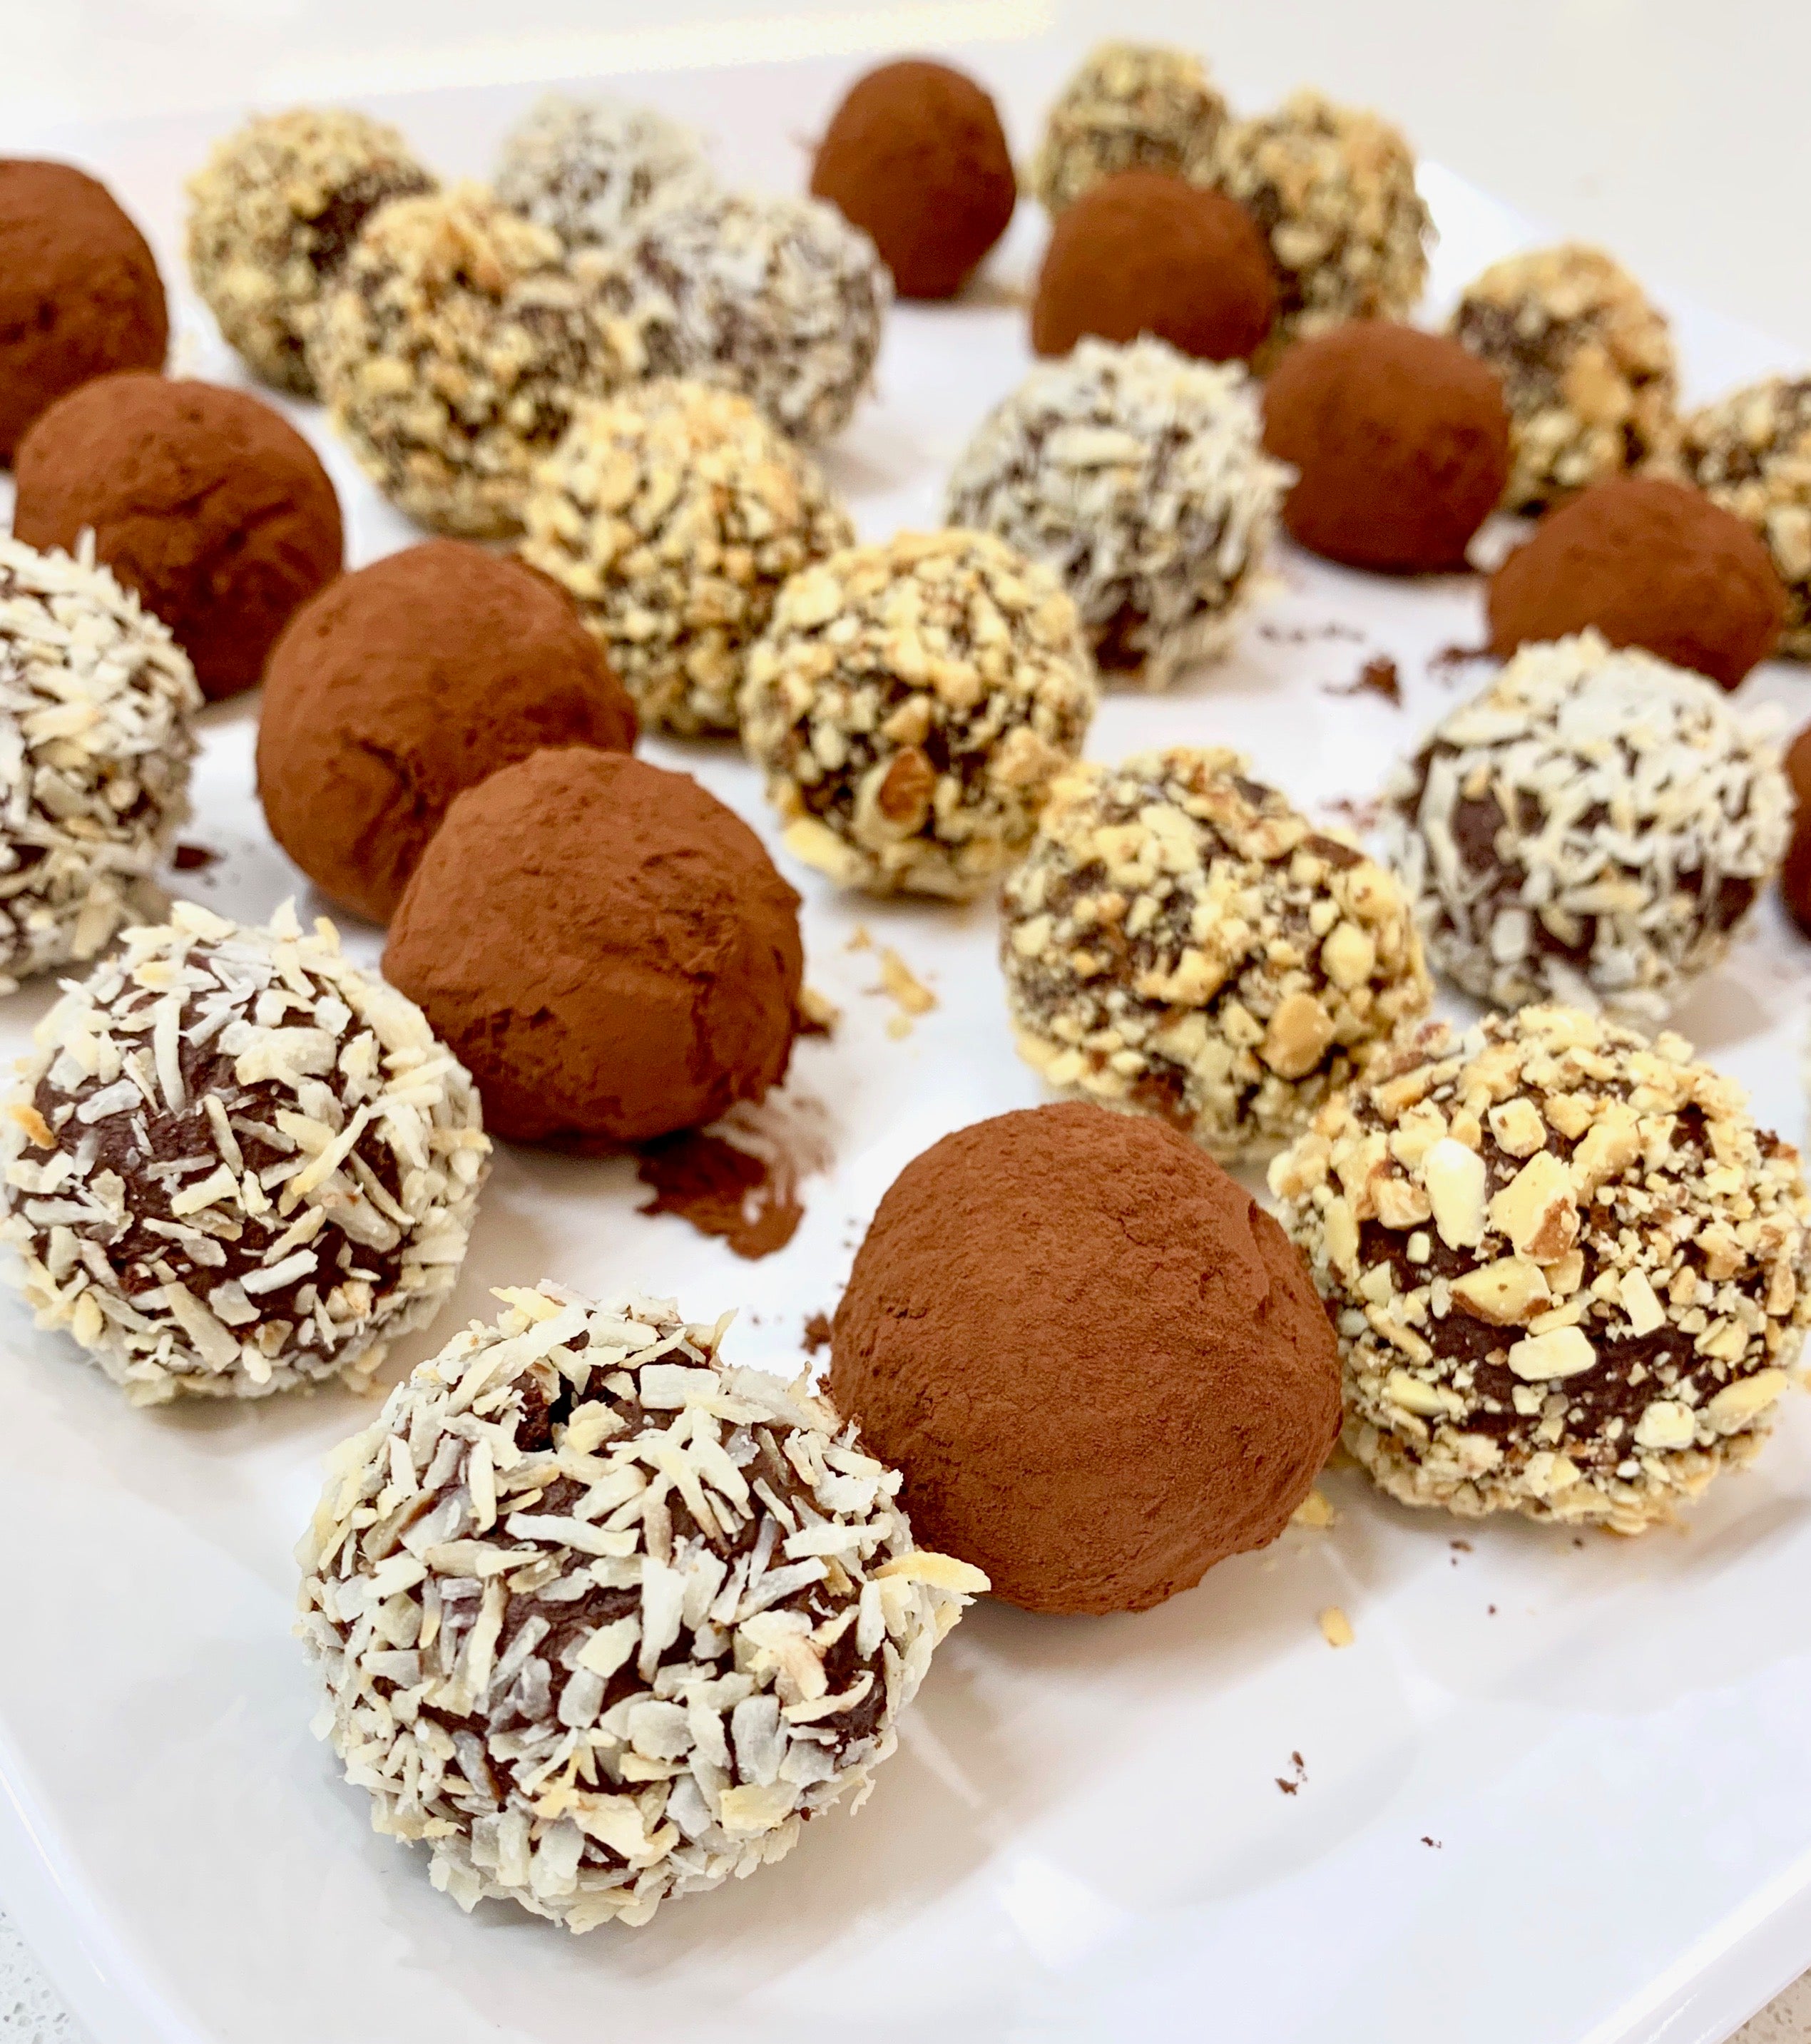 Chocolate Truffles with Almonds and Dates